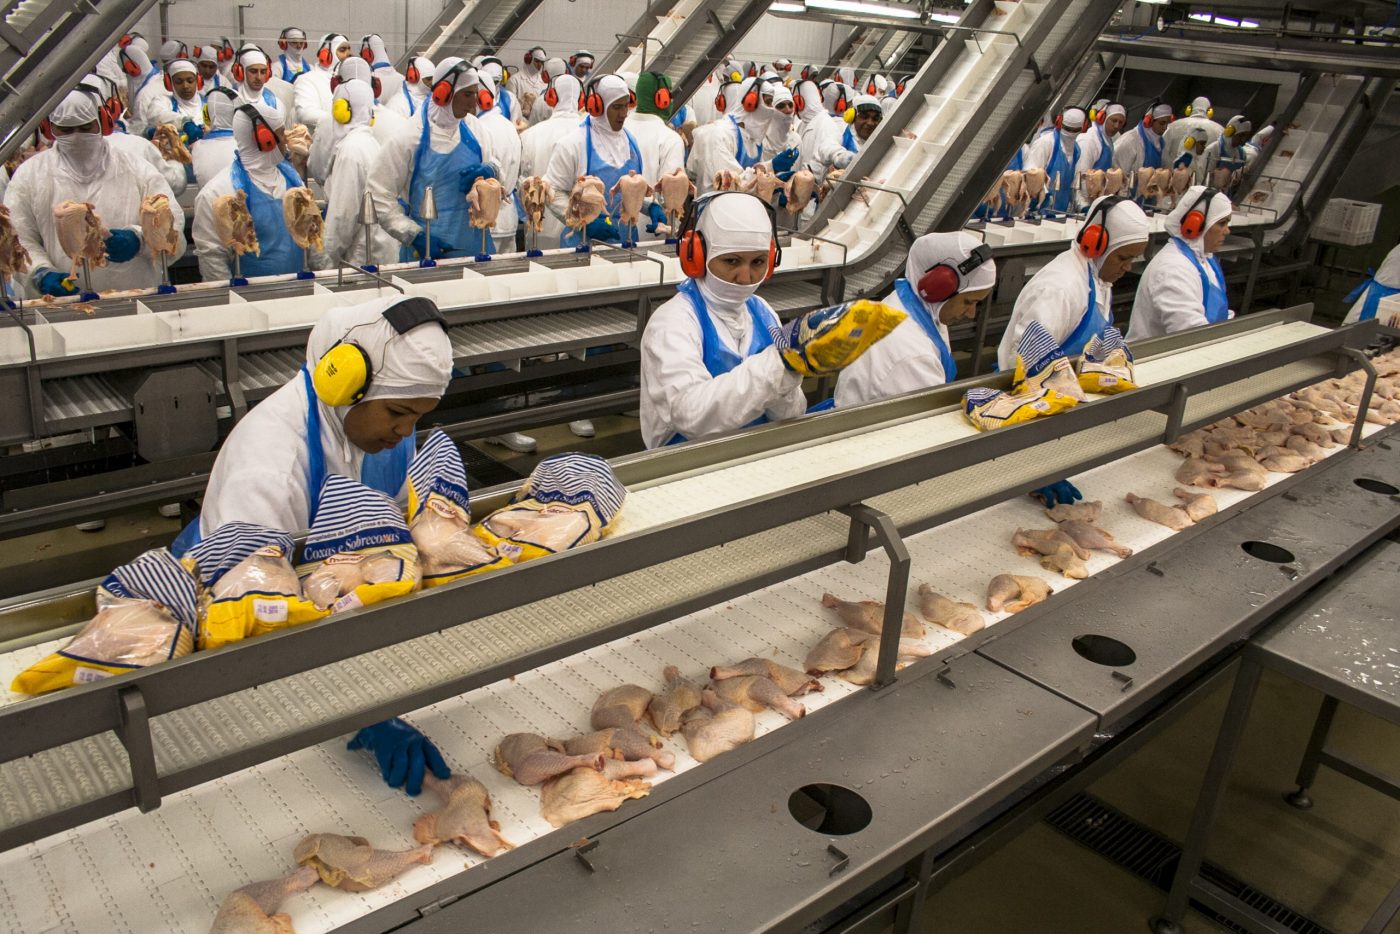 Vertical explainer photo 1 - Processing factory chicken